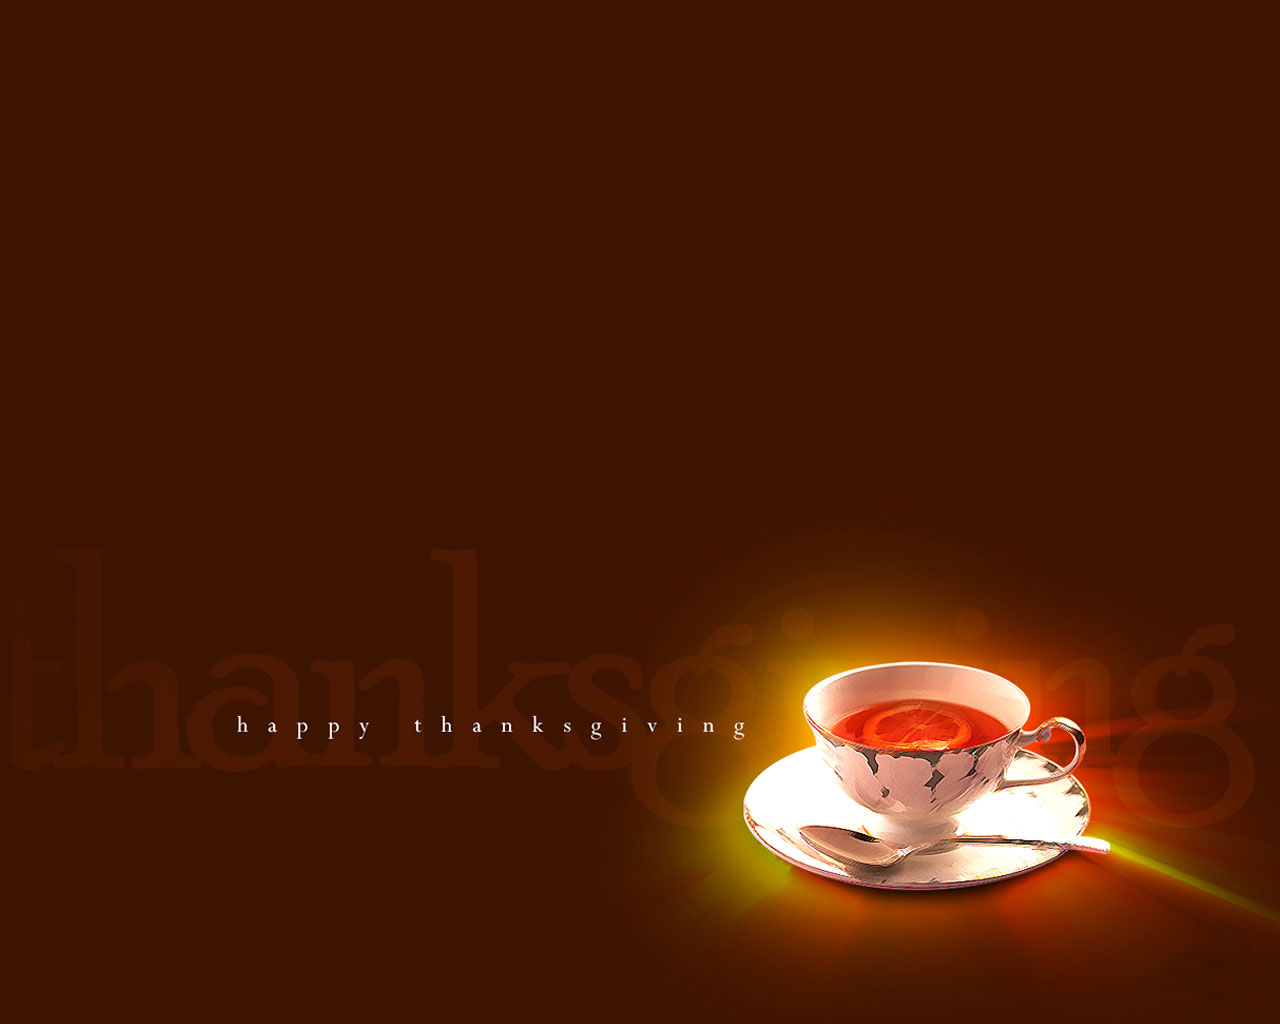 Thanksgiving coffe backgrounds